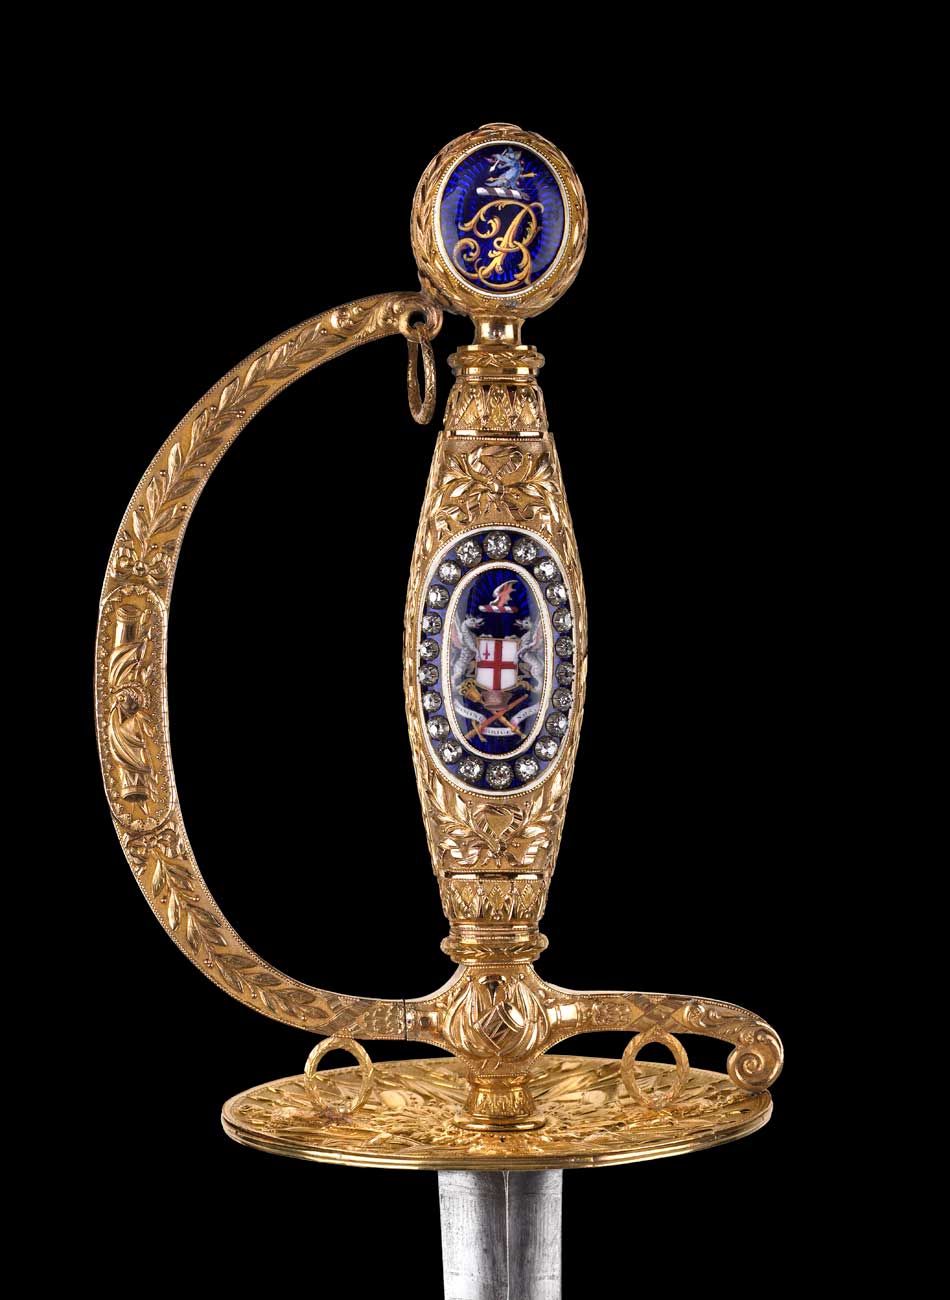 The Corporation of London presented this bejewelled honorary sword to Admiral Lord Nelson in 1800.